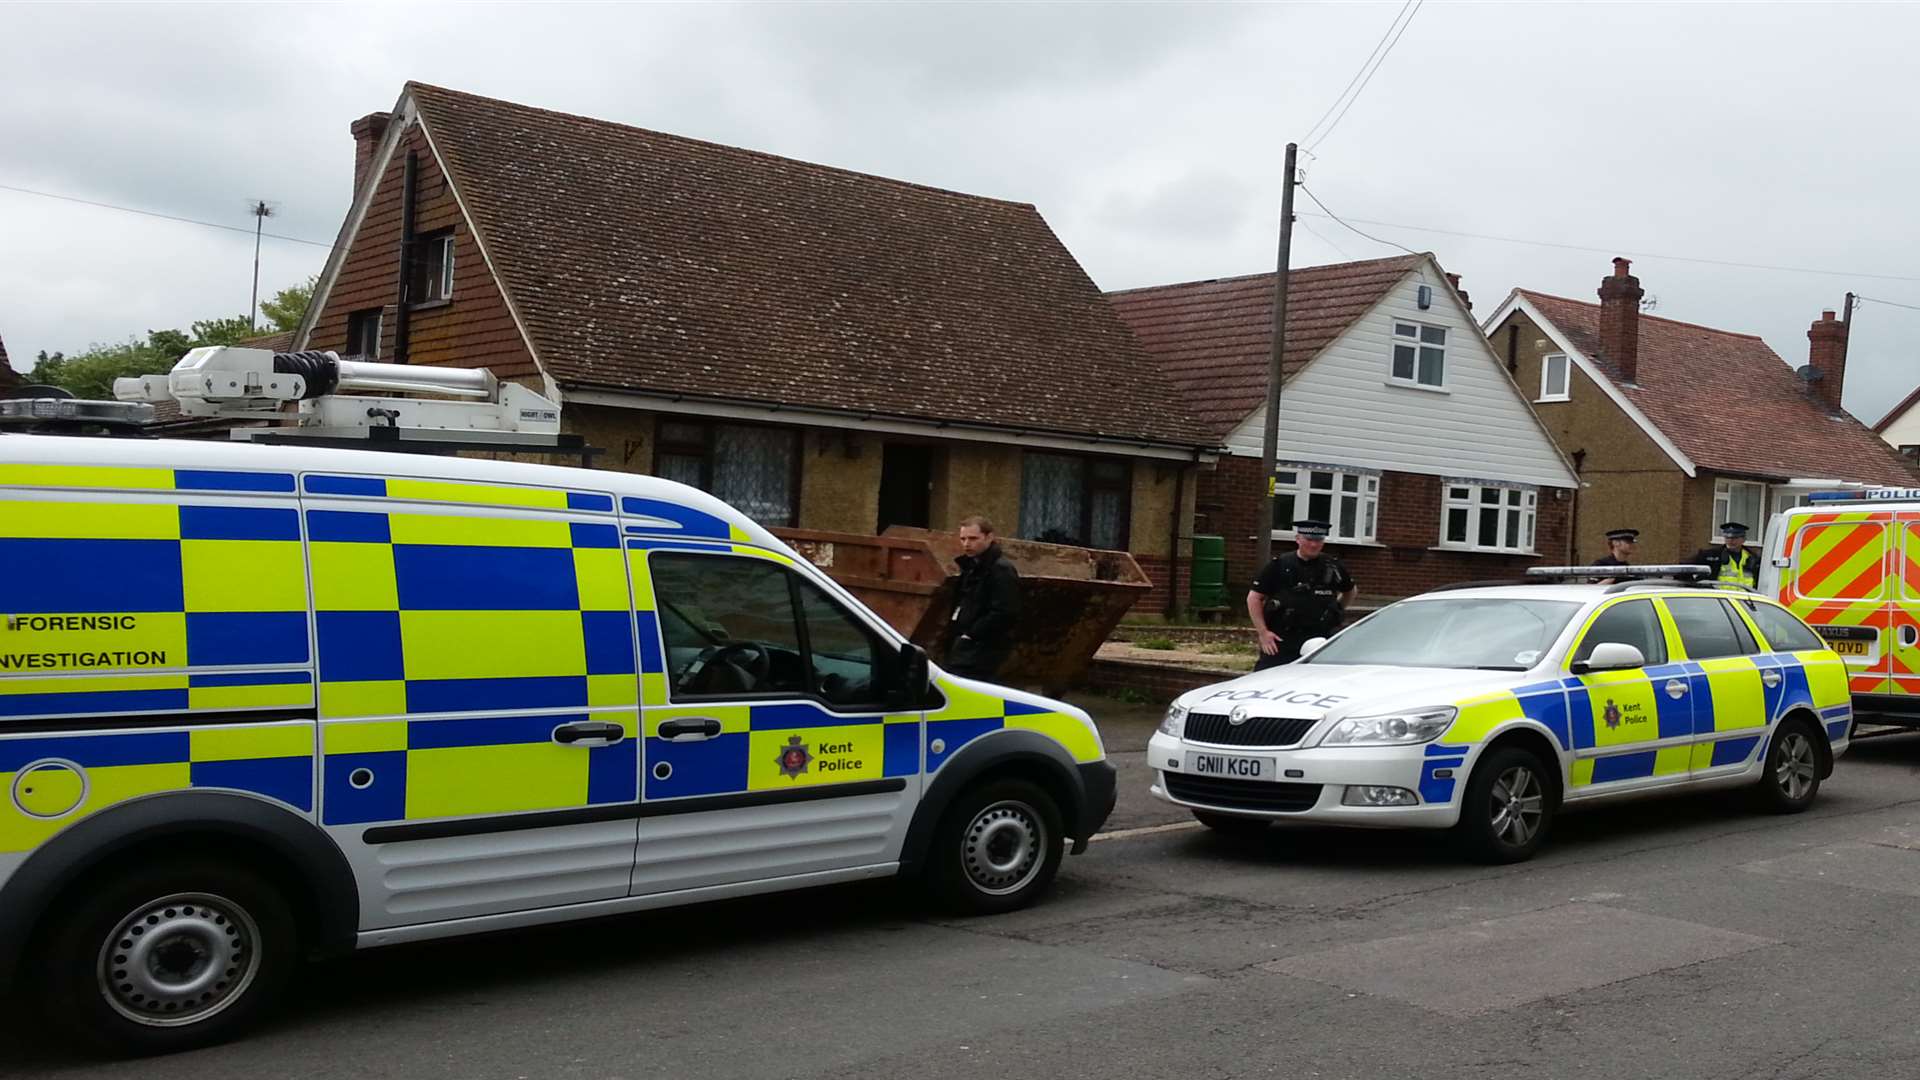 Police vehicles outside the property in Detling